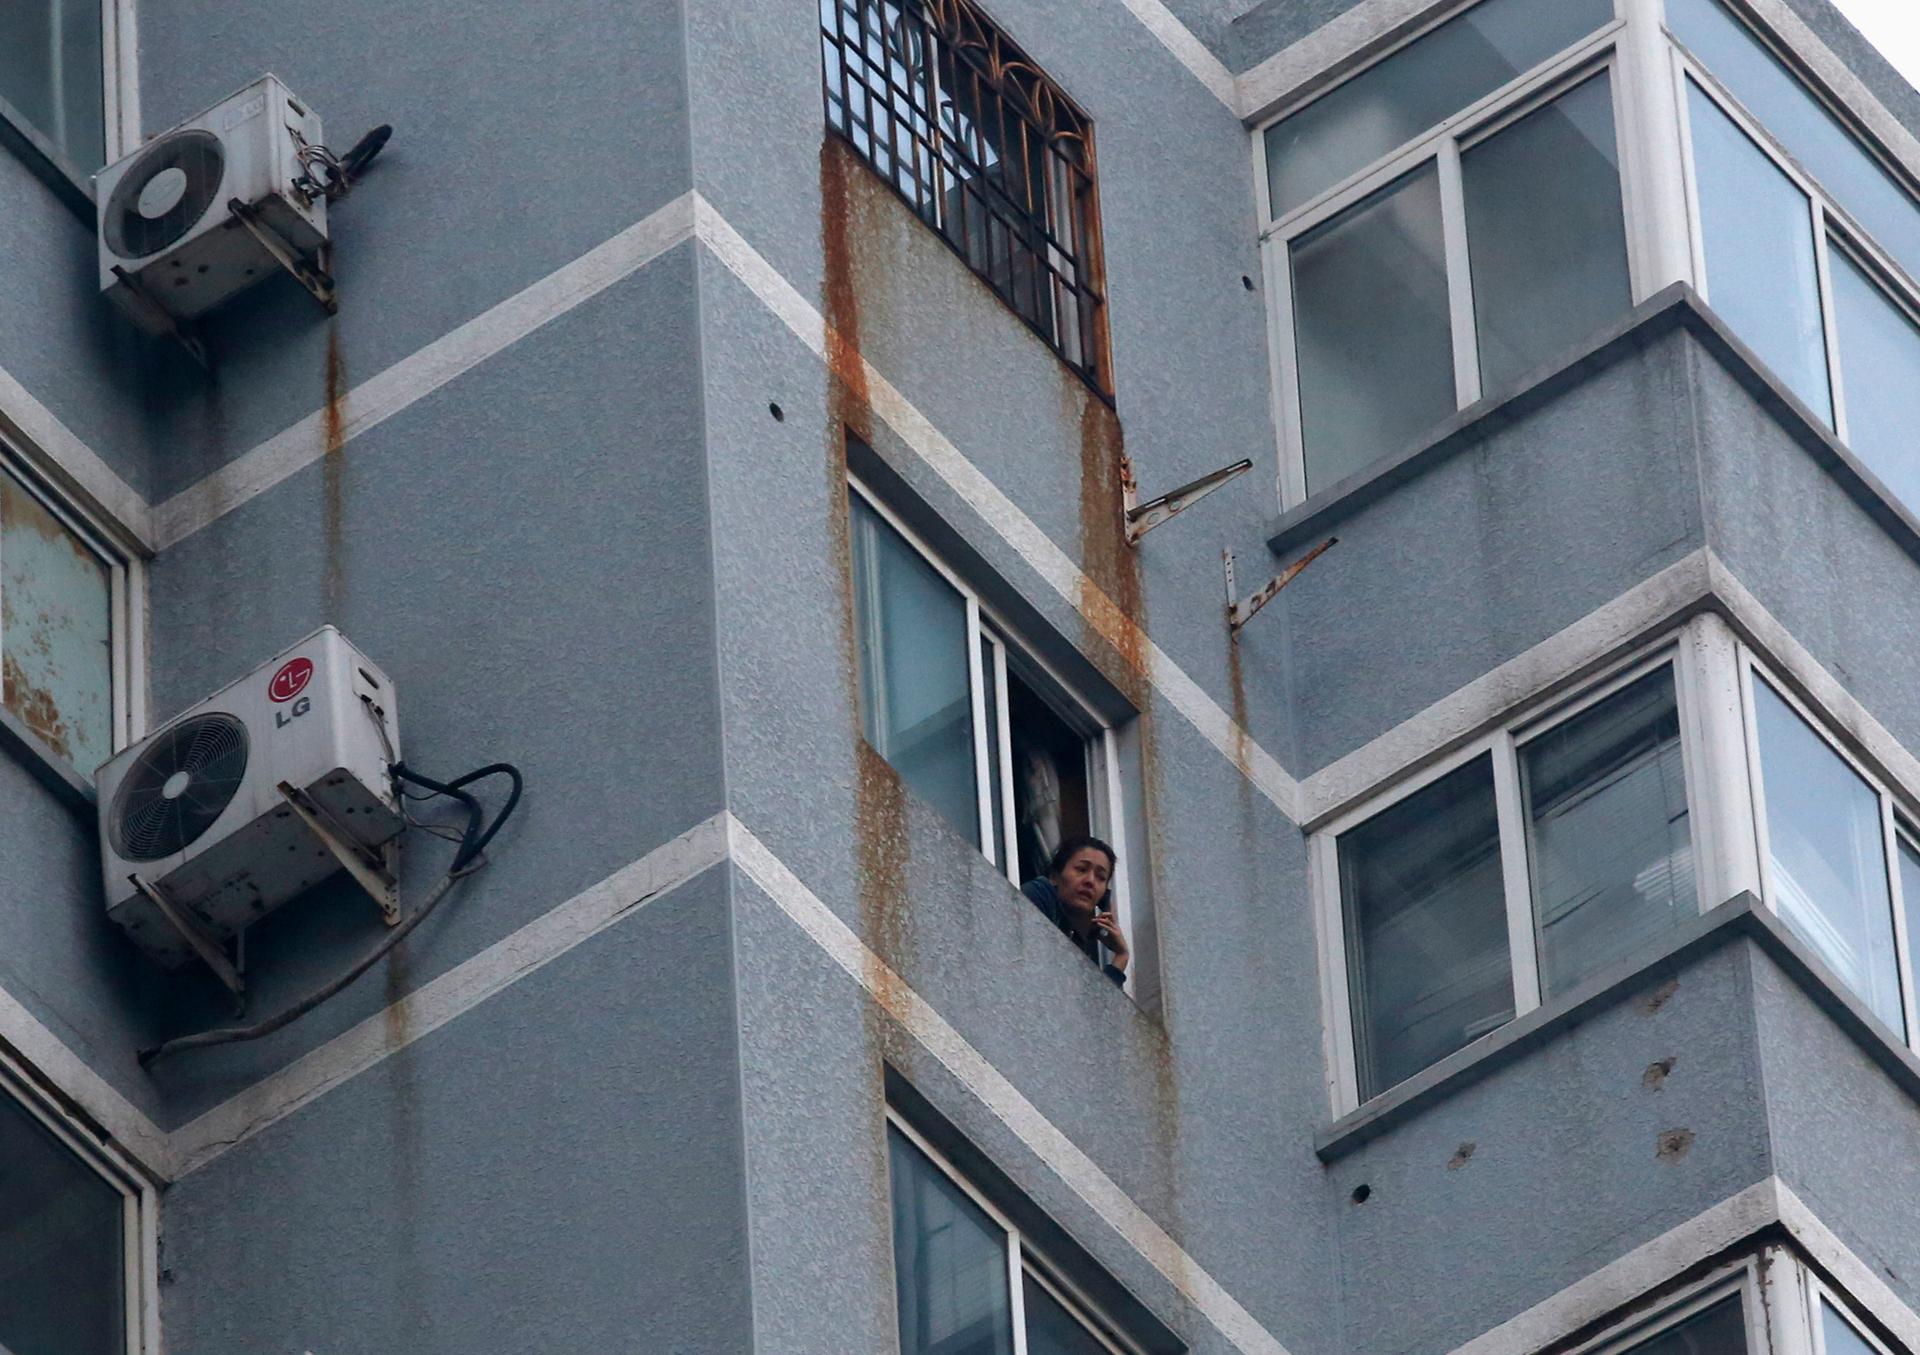 Guzailai Nu'er, the wife of Ilham Tohti, looks out the window of her house in Beijing as she does an interview over the phone with Reuters on January 17, 2014. Nu'er has been prevented from leaving by Chinese police. 